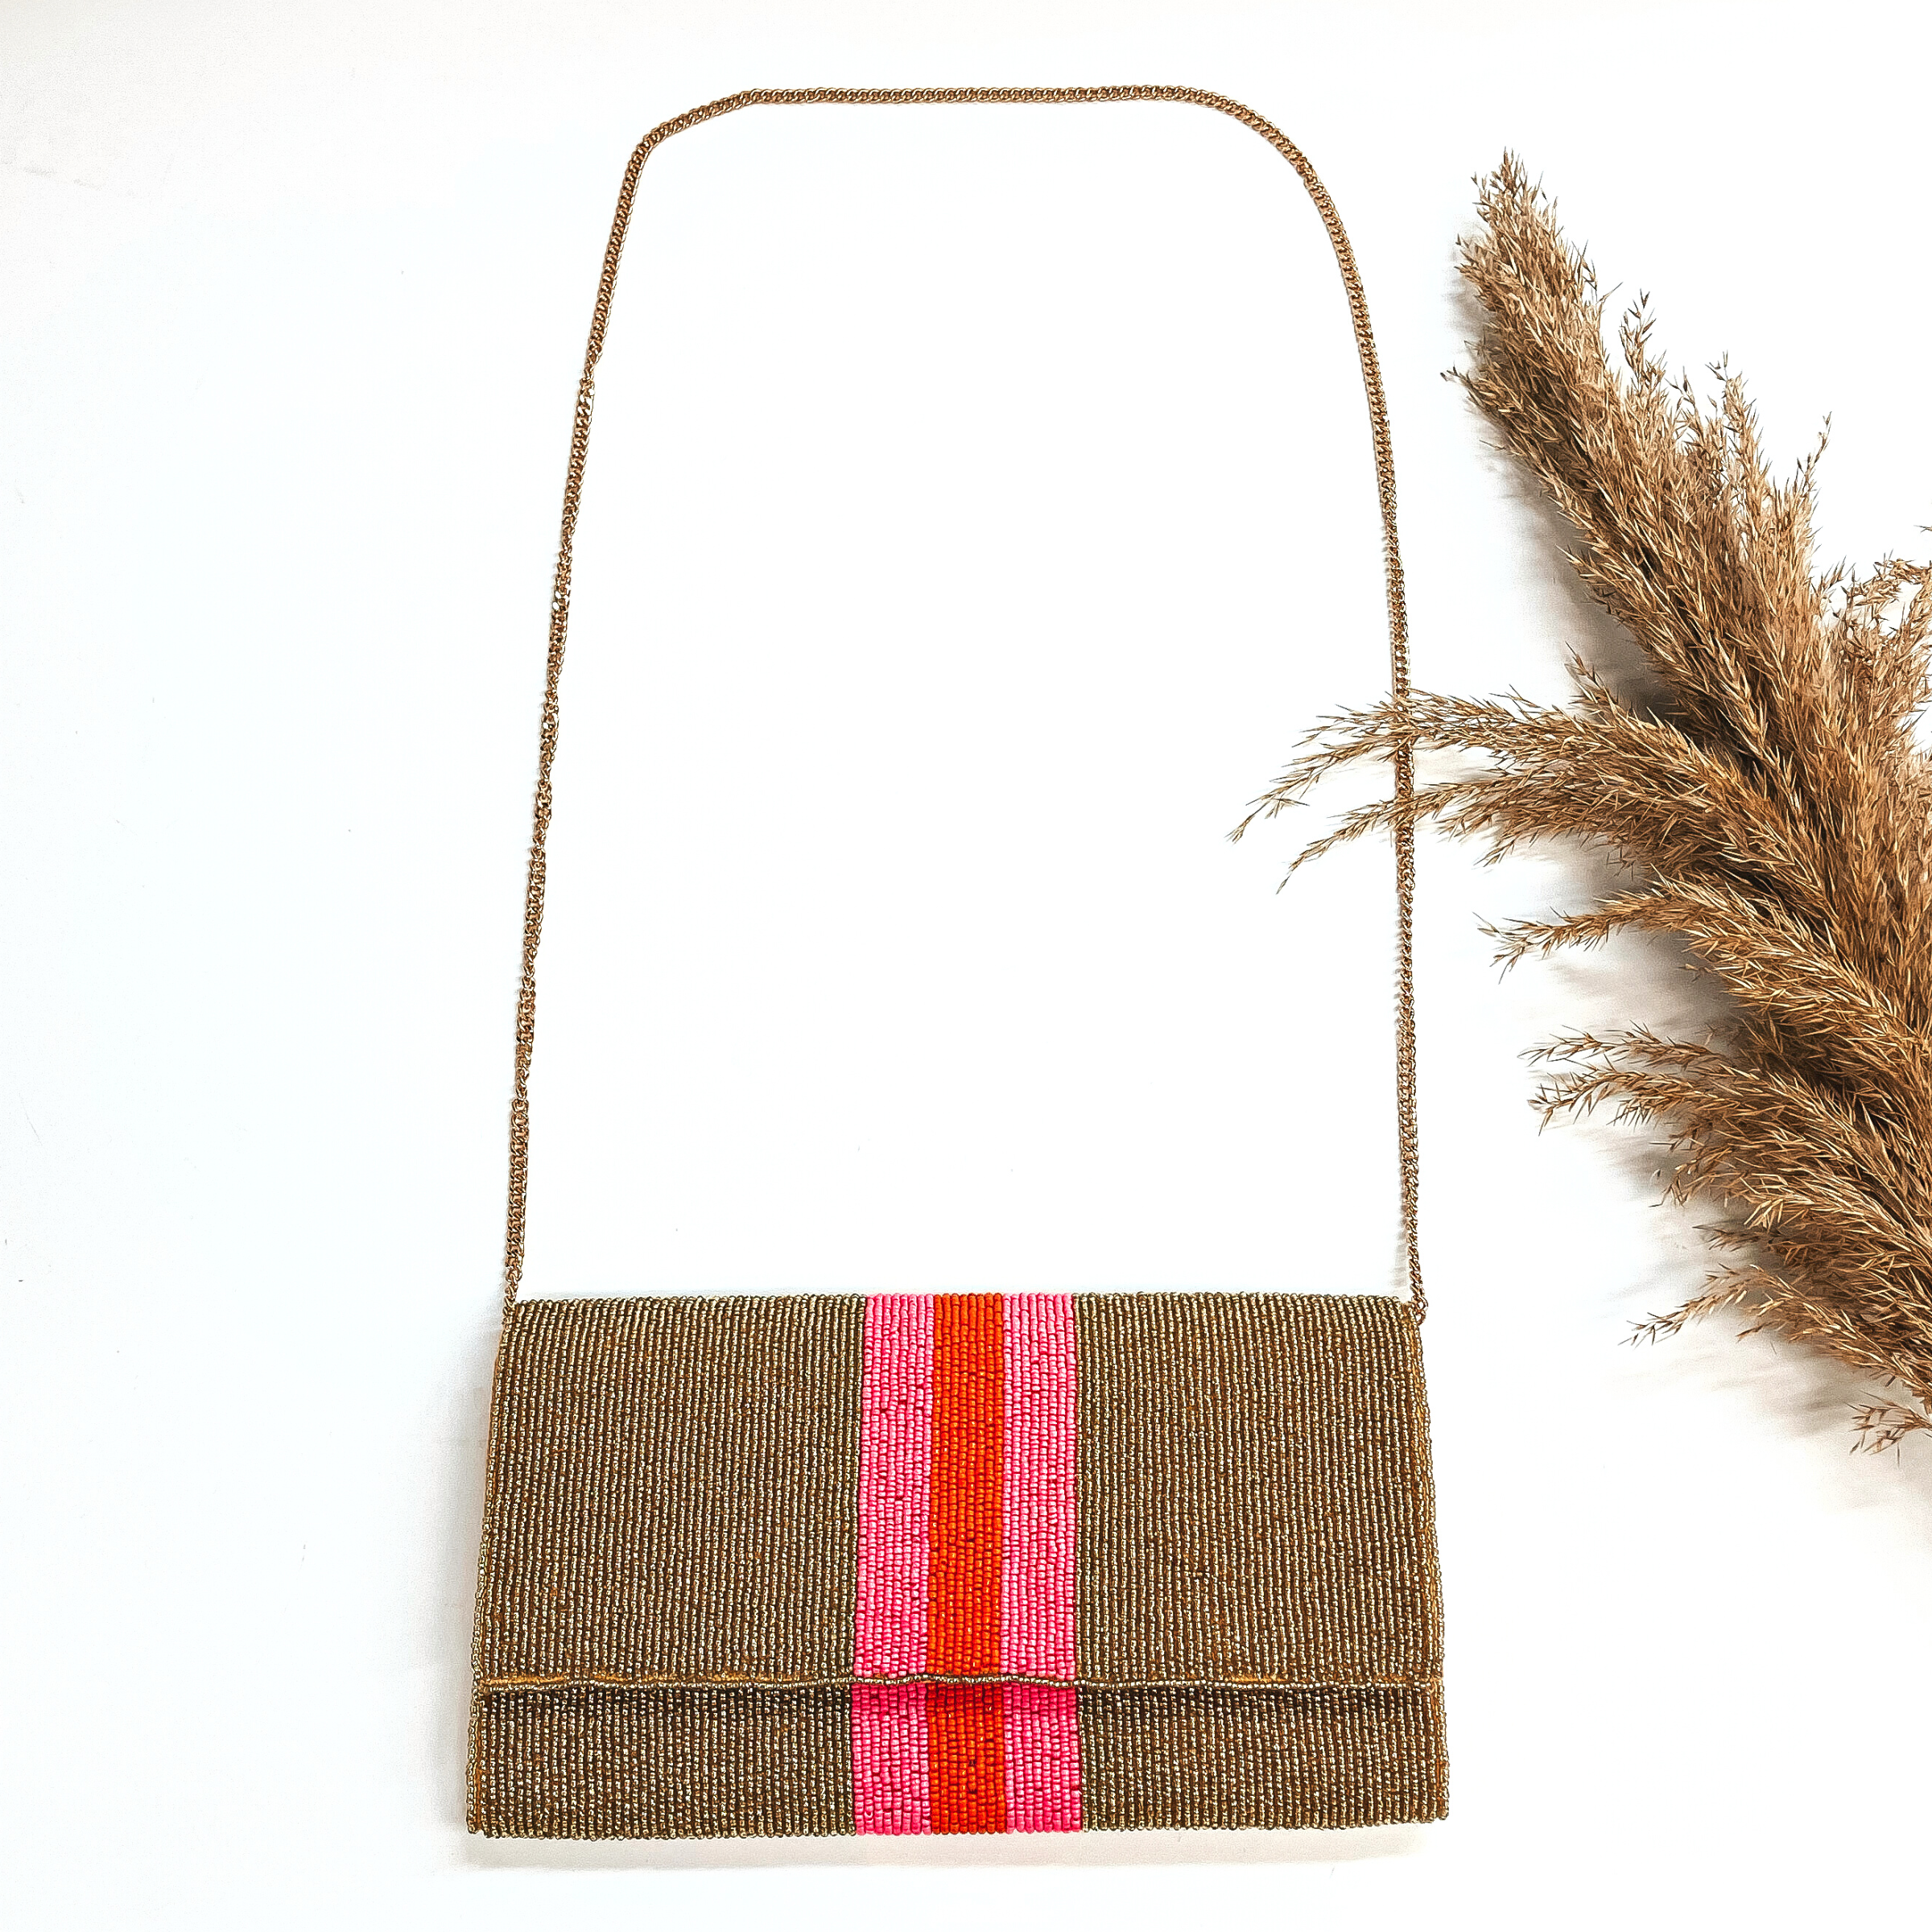 This is a seedbeaded clutch purse with a gold tone chain. This bag is in  gold with  three stripes in the middle, two hot pink and one orange line in the middle. This bag  is taken laying on a white background with a brown plant in the side as decor.